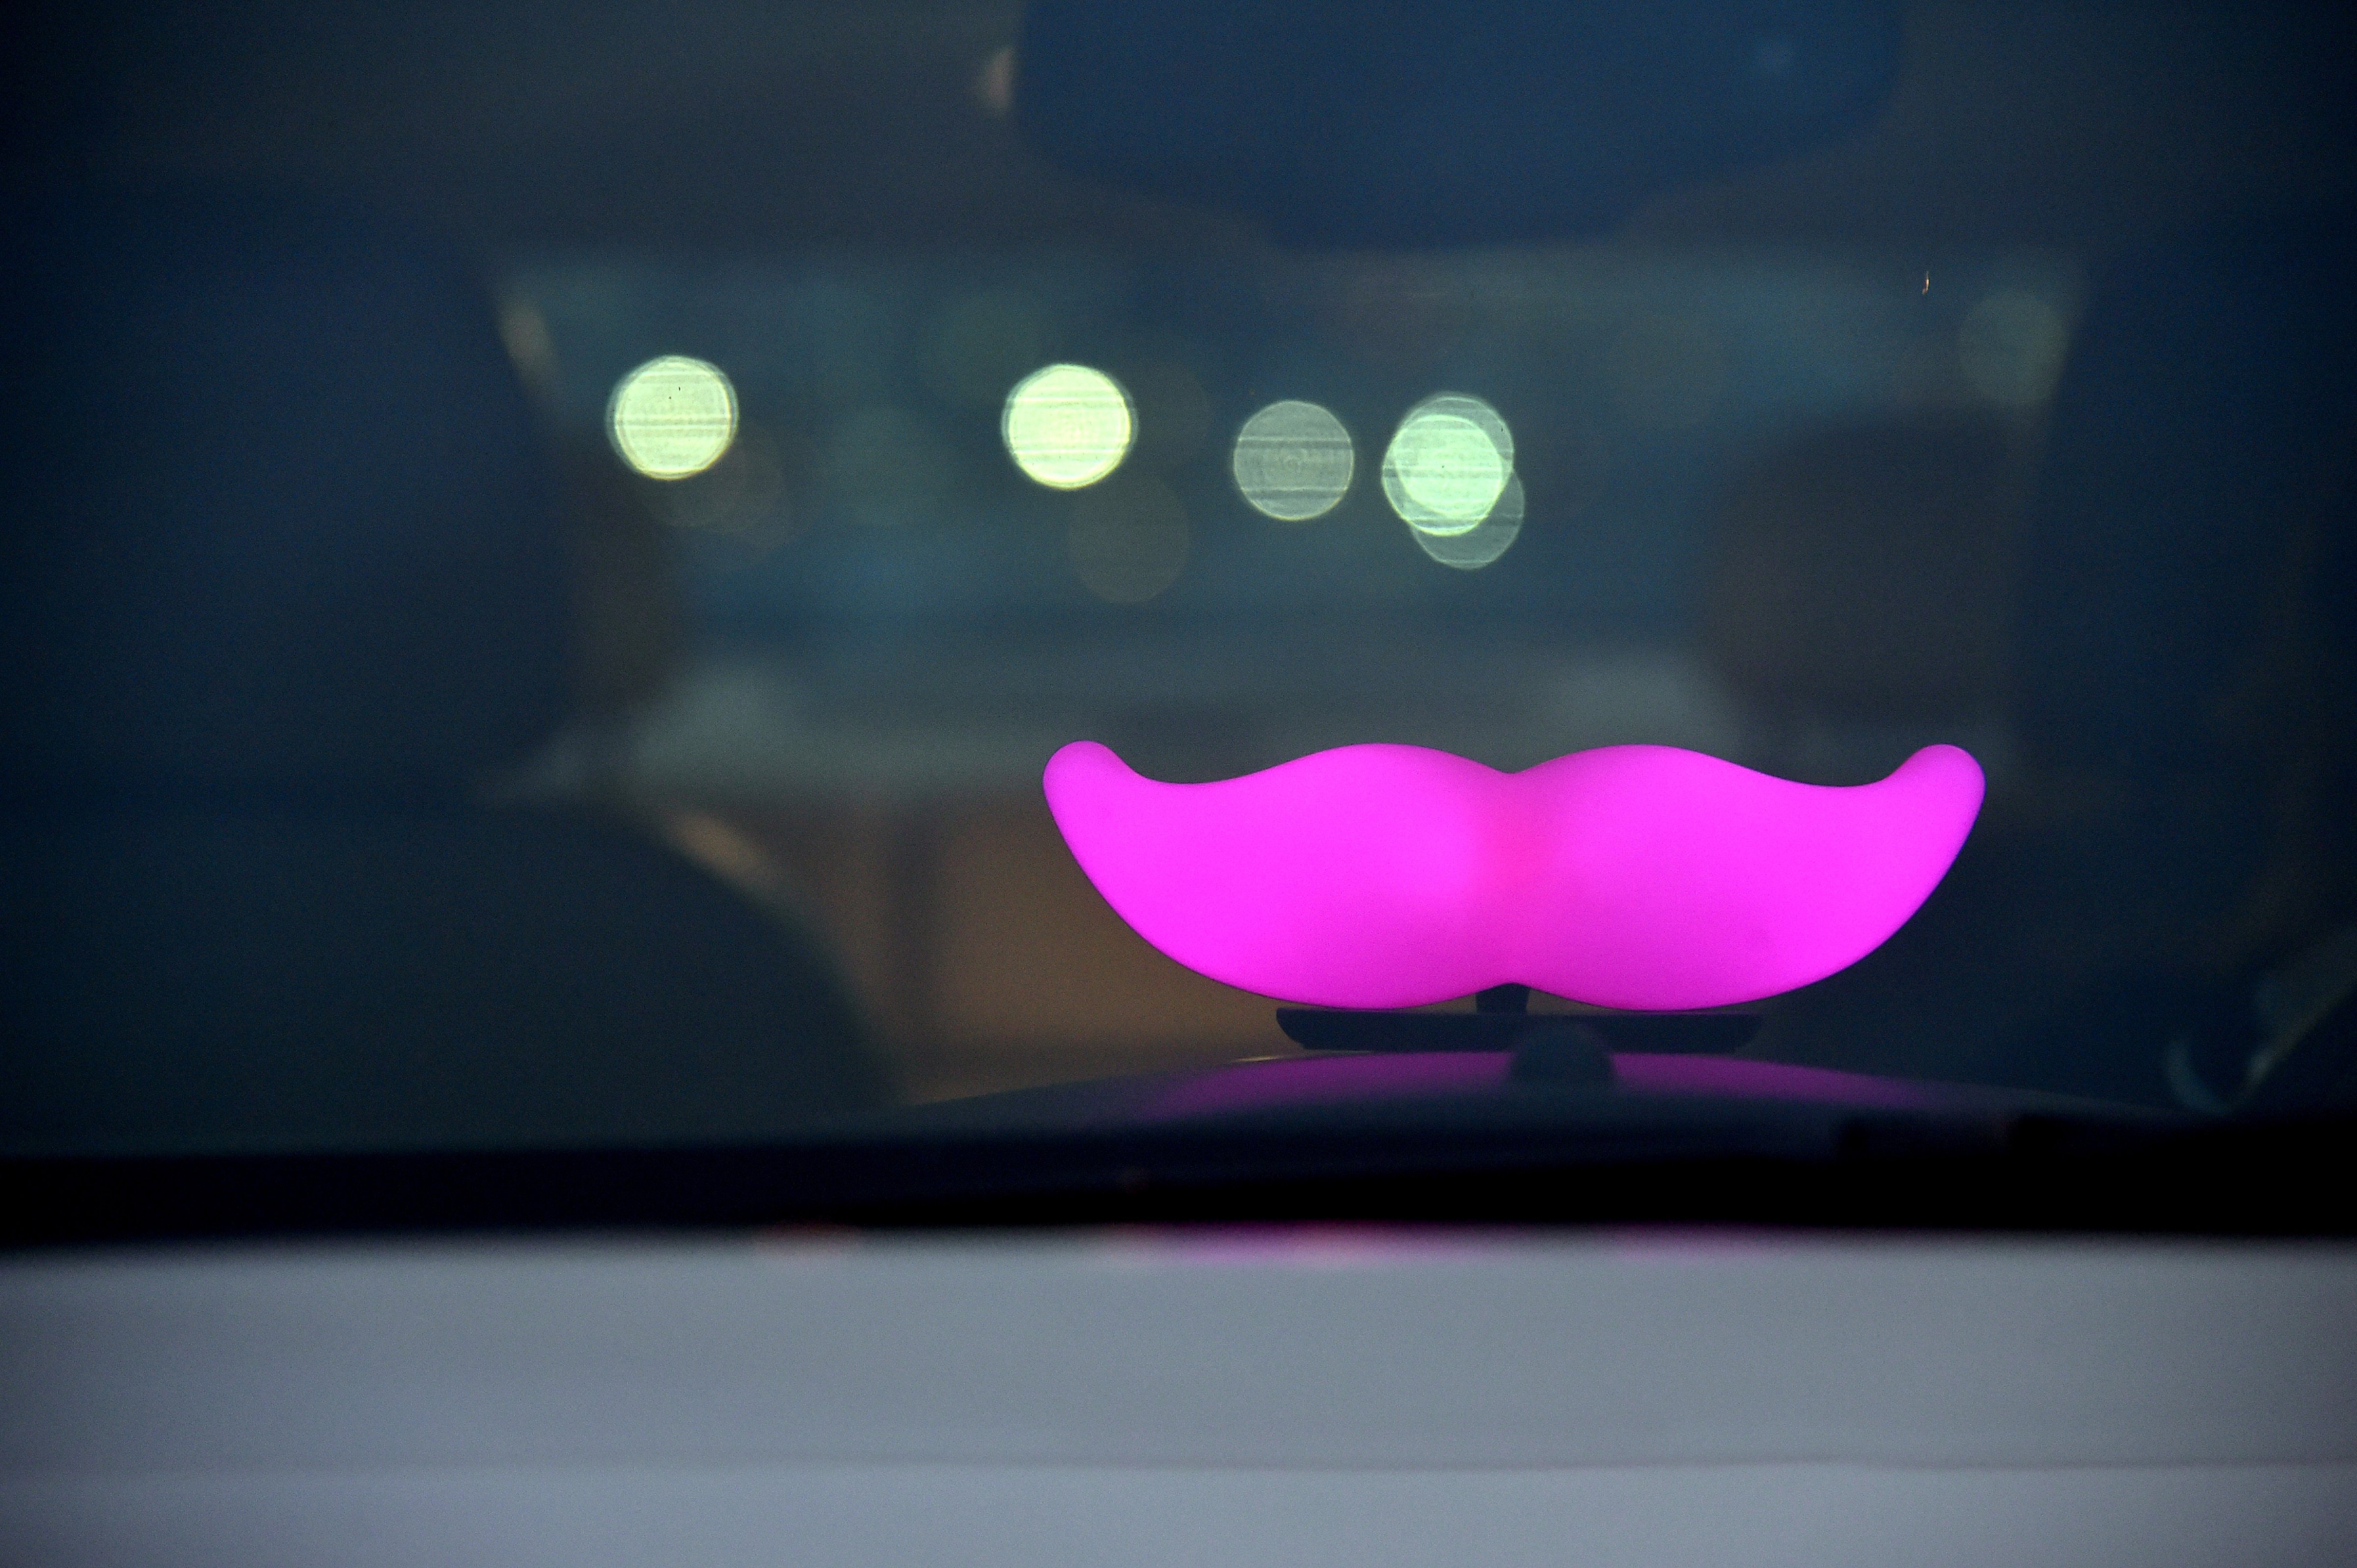 The Glowstache is seen in a Lyft driver's car in San Francisco, Calif. on Feb. 3, 2016. (Mike Coppola—Getty Images)